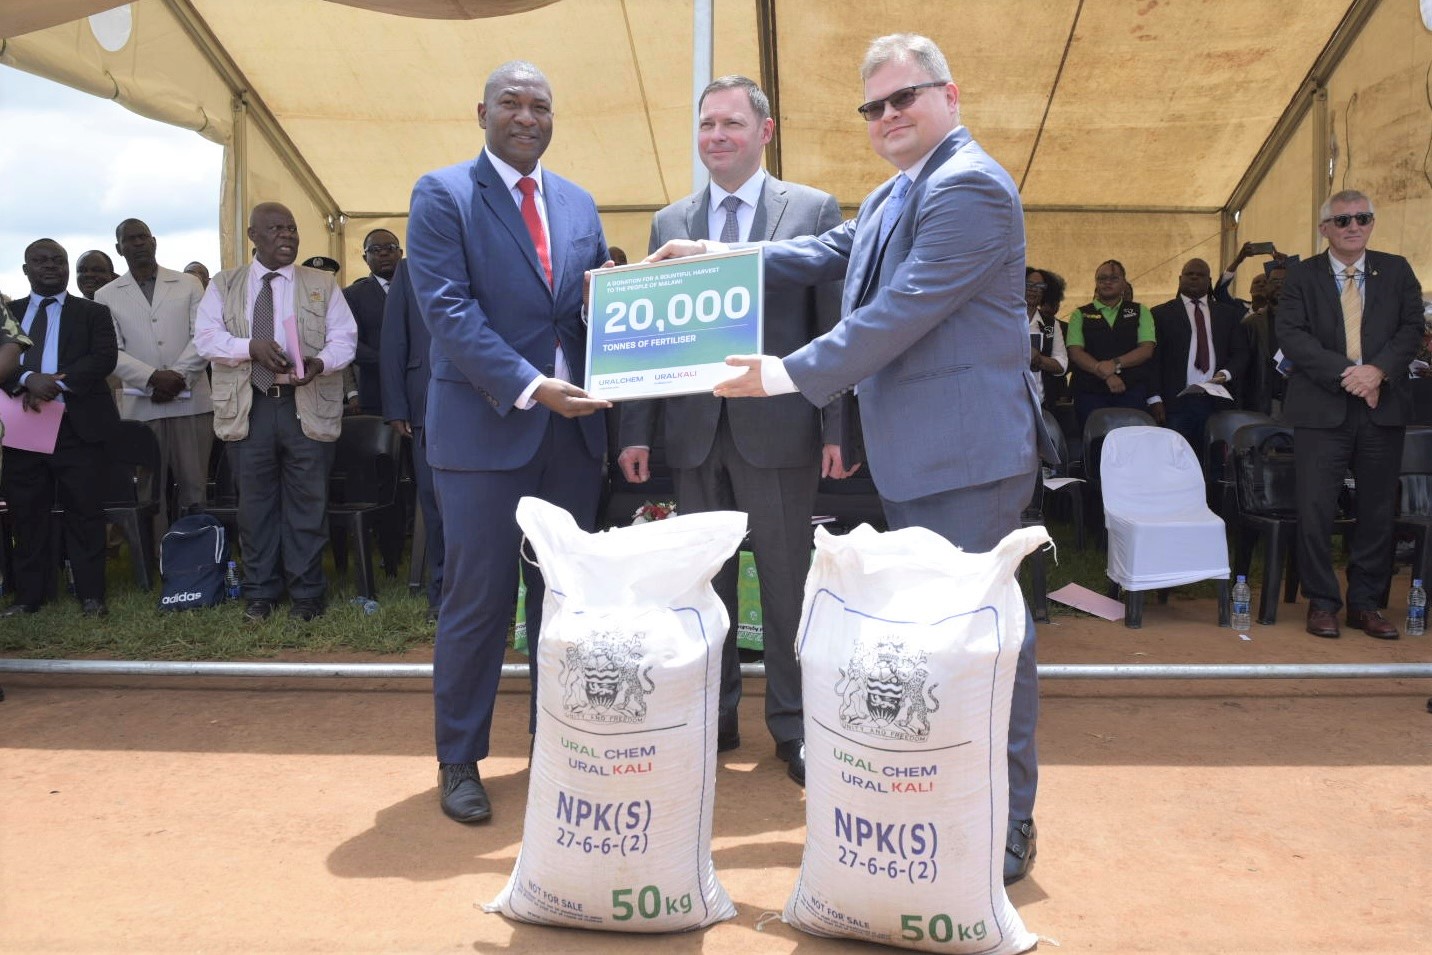 Russia donates fertilizer to Malawi, likely seeking African support on Ukraine